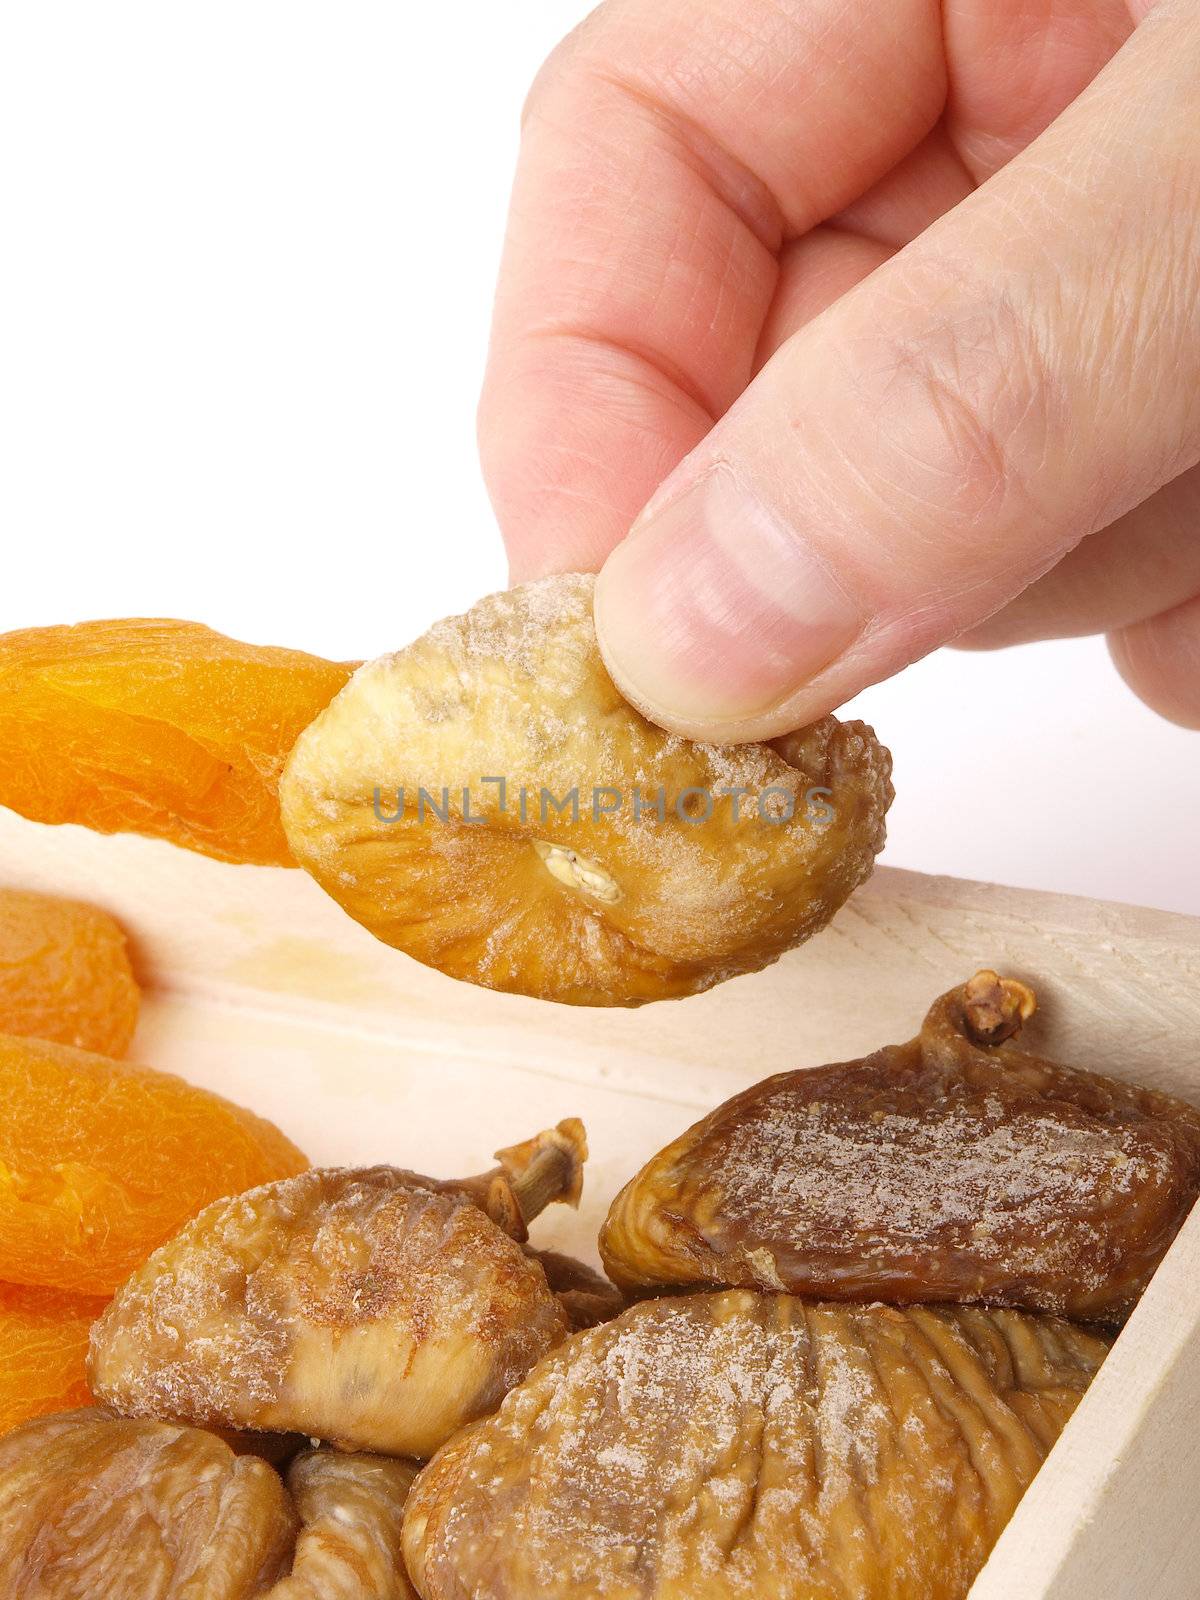 Hand taking a dried fruit by dotweb